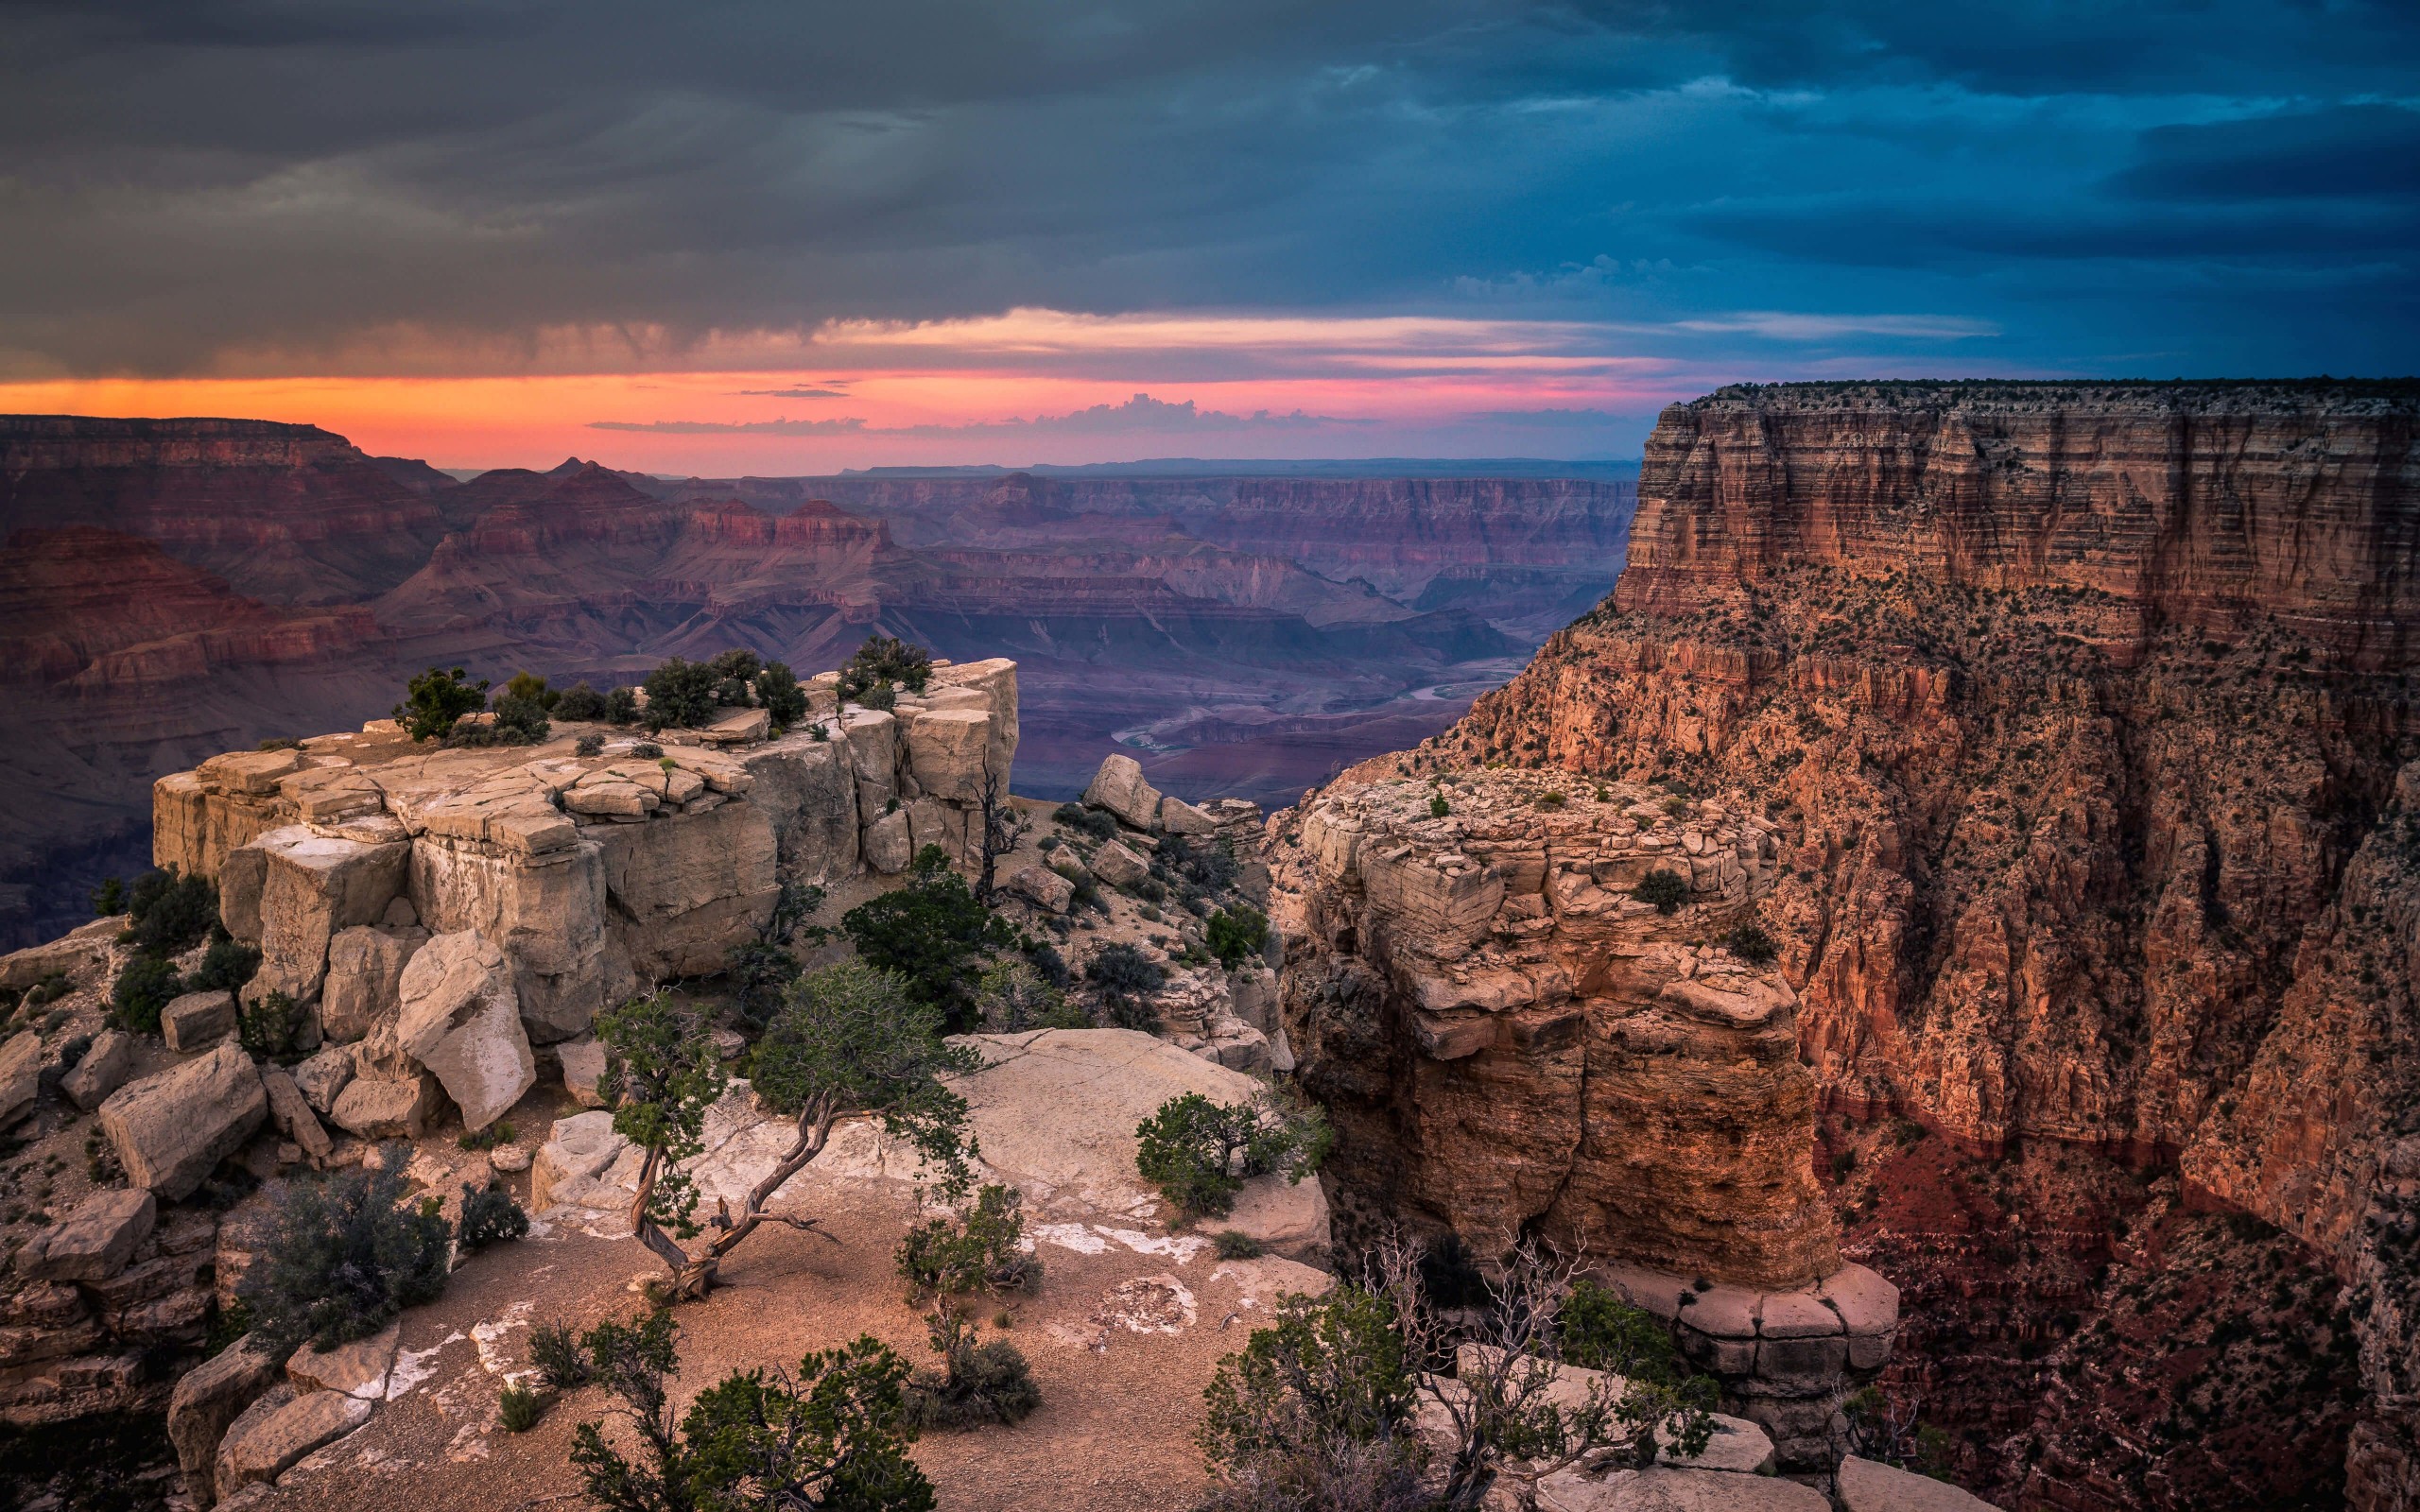 Sunset At The Grand Canyon Wallpaper for Desktop 2560x1600